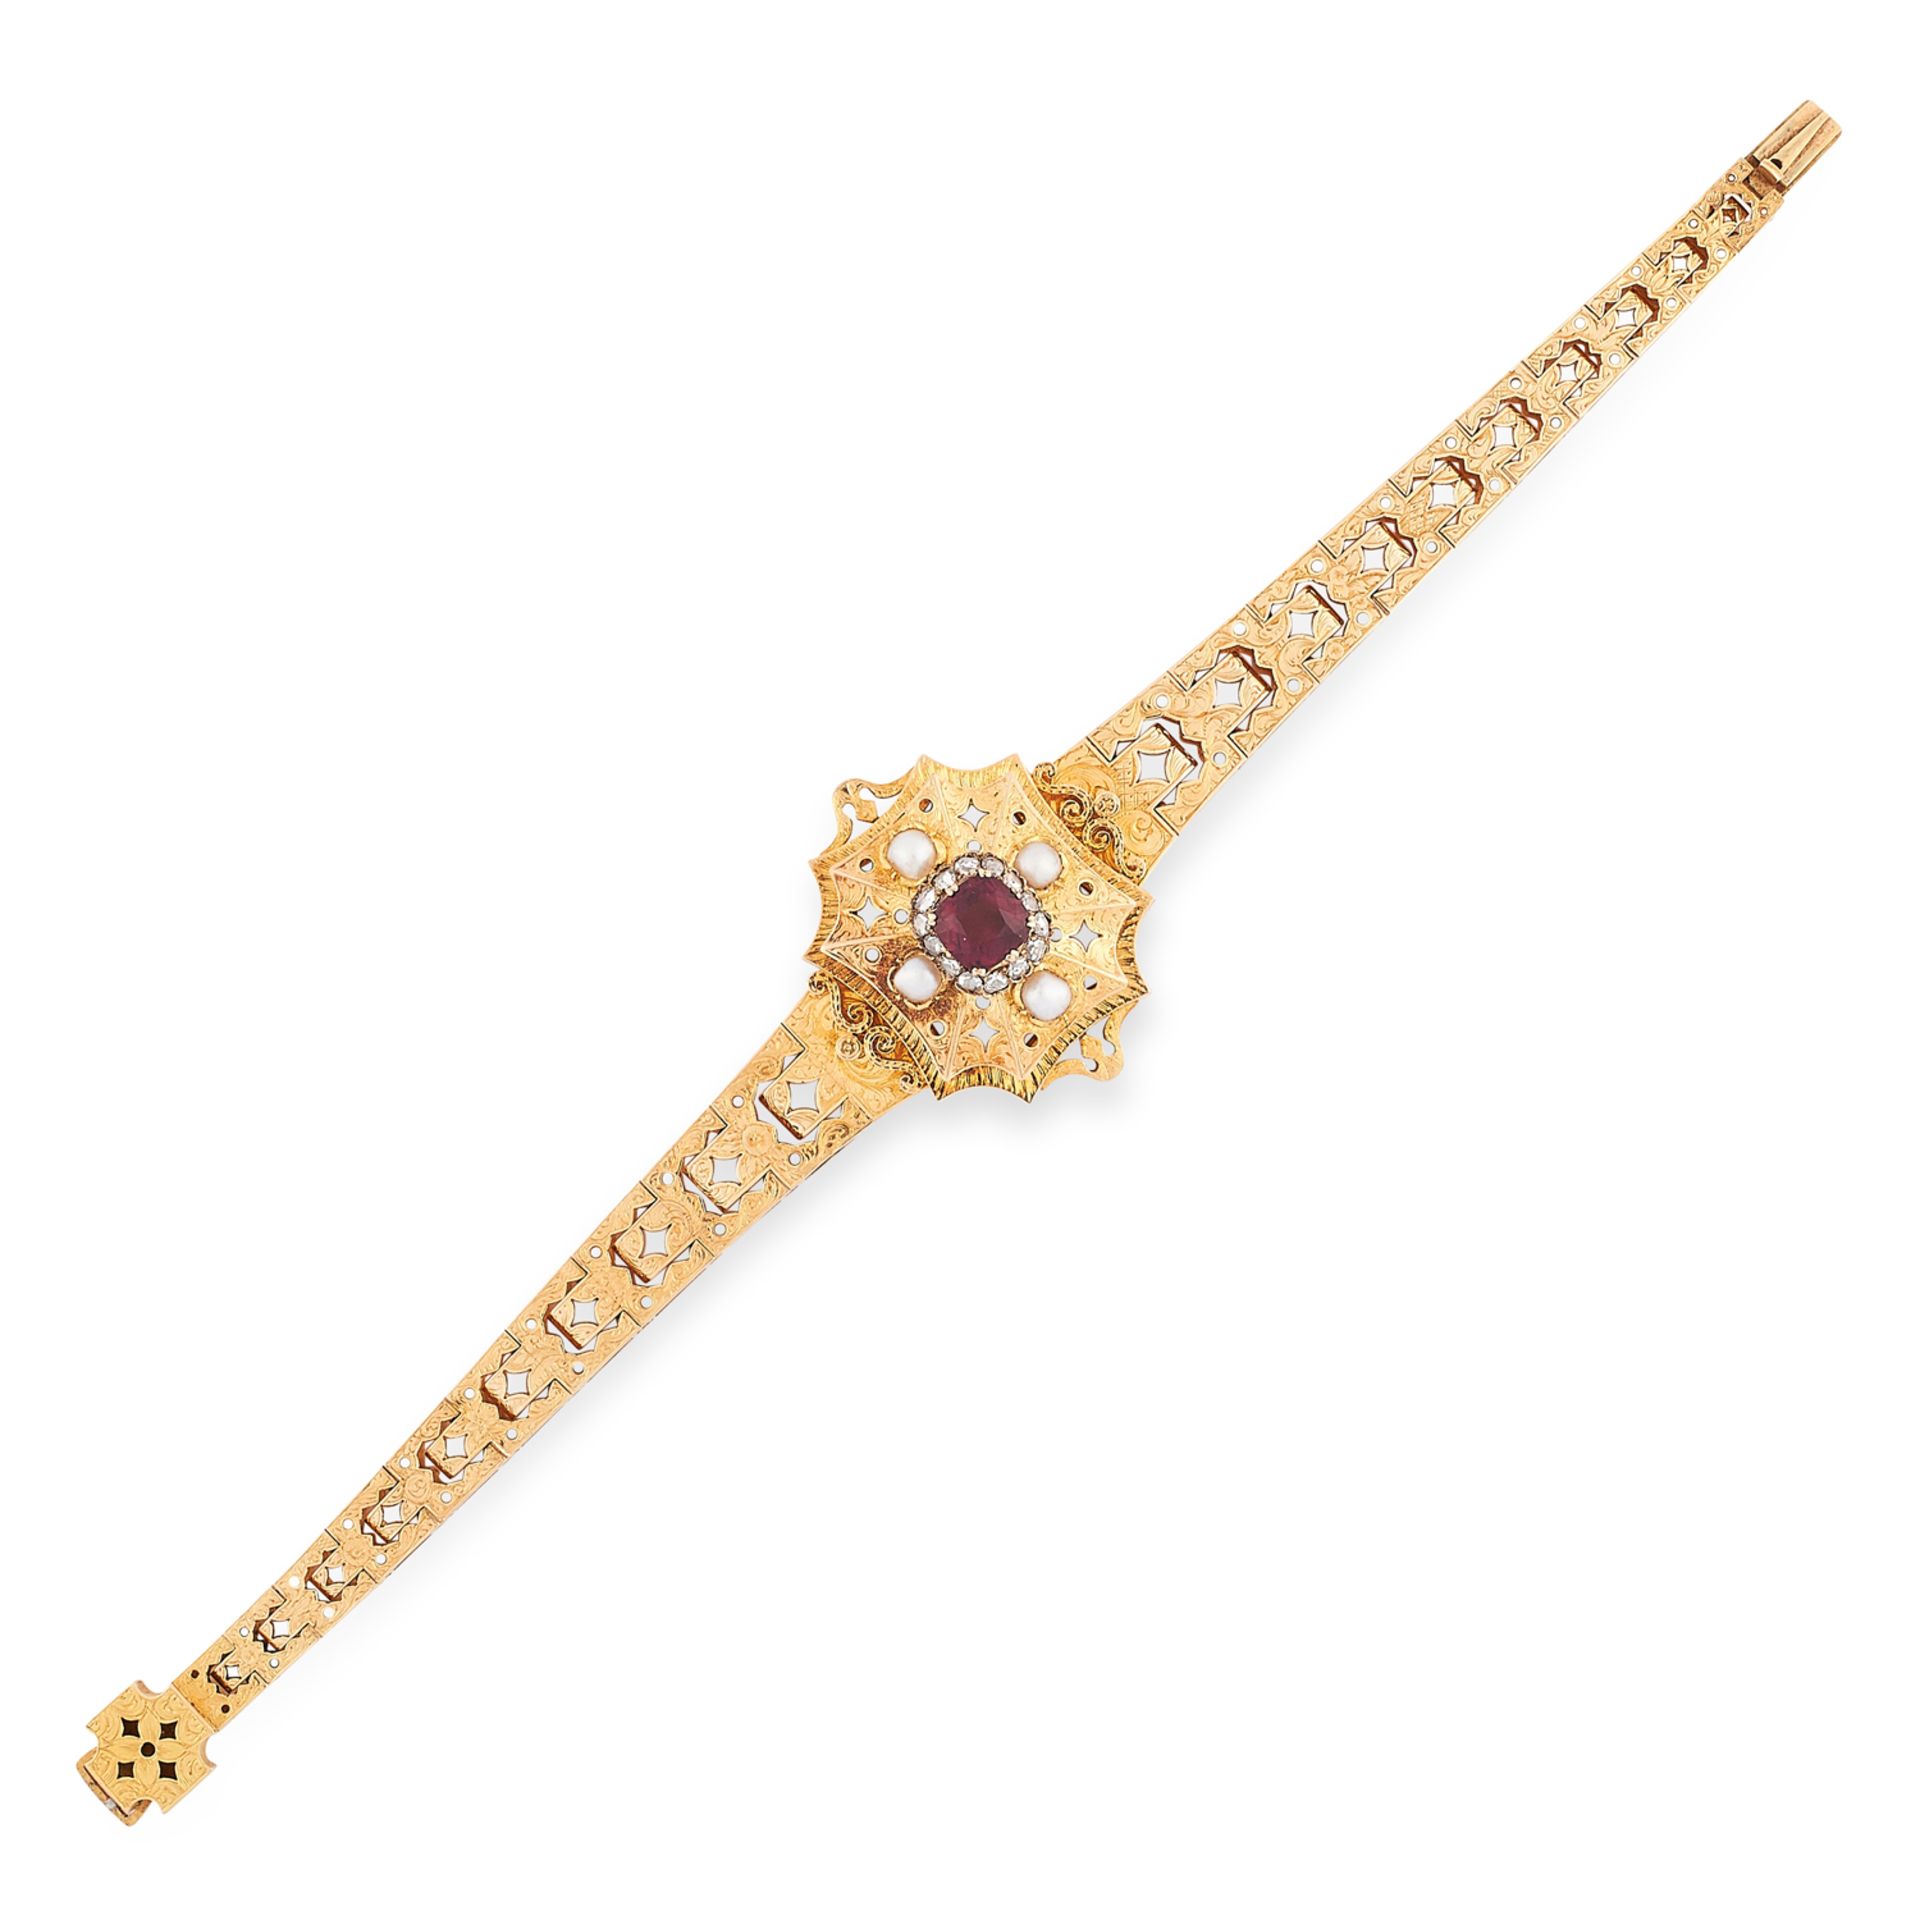 AN ANTIQUE GARNET, DIAMOND AND PEARL BRACELET, 19TH CENTURY in yellow gold, the tapering body with